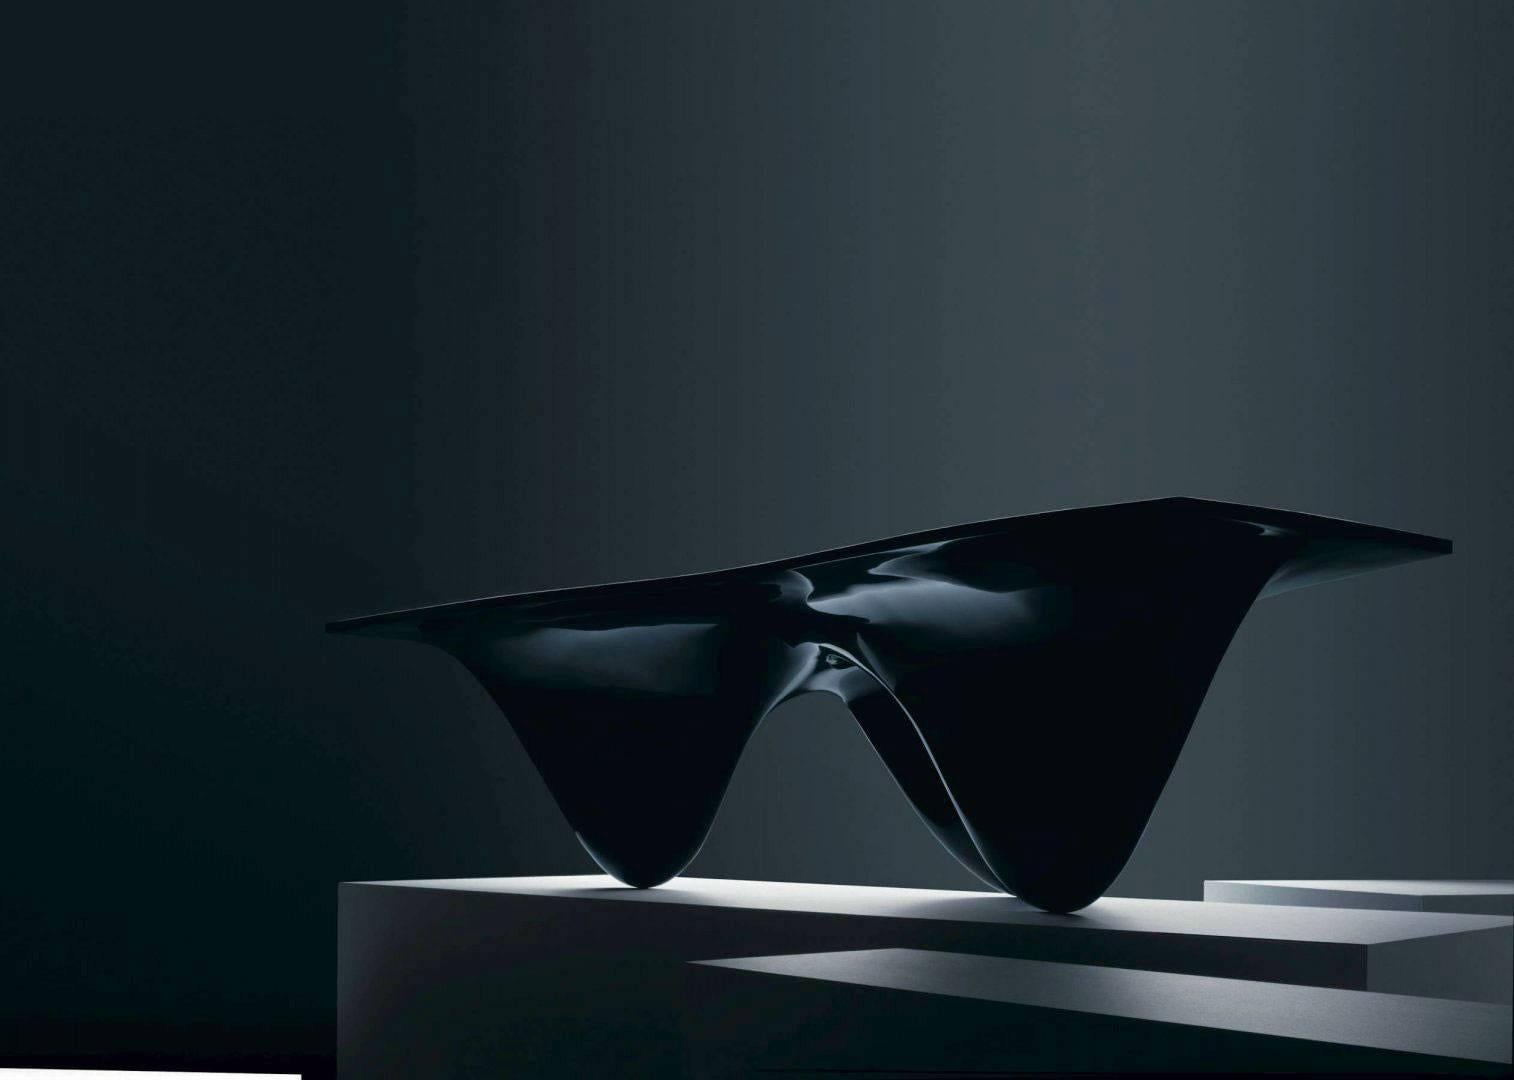 Zaha Hadid design icon inspired by the movement and fluidity of water. Available in black or white, matte or glossy finish.

Limited edition of 39 available

Fibreglass Table
2005

Pioneering architectural software was used by Zaha Hadid to sculpt